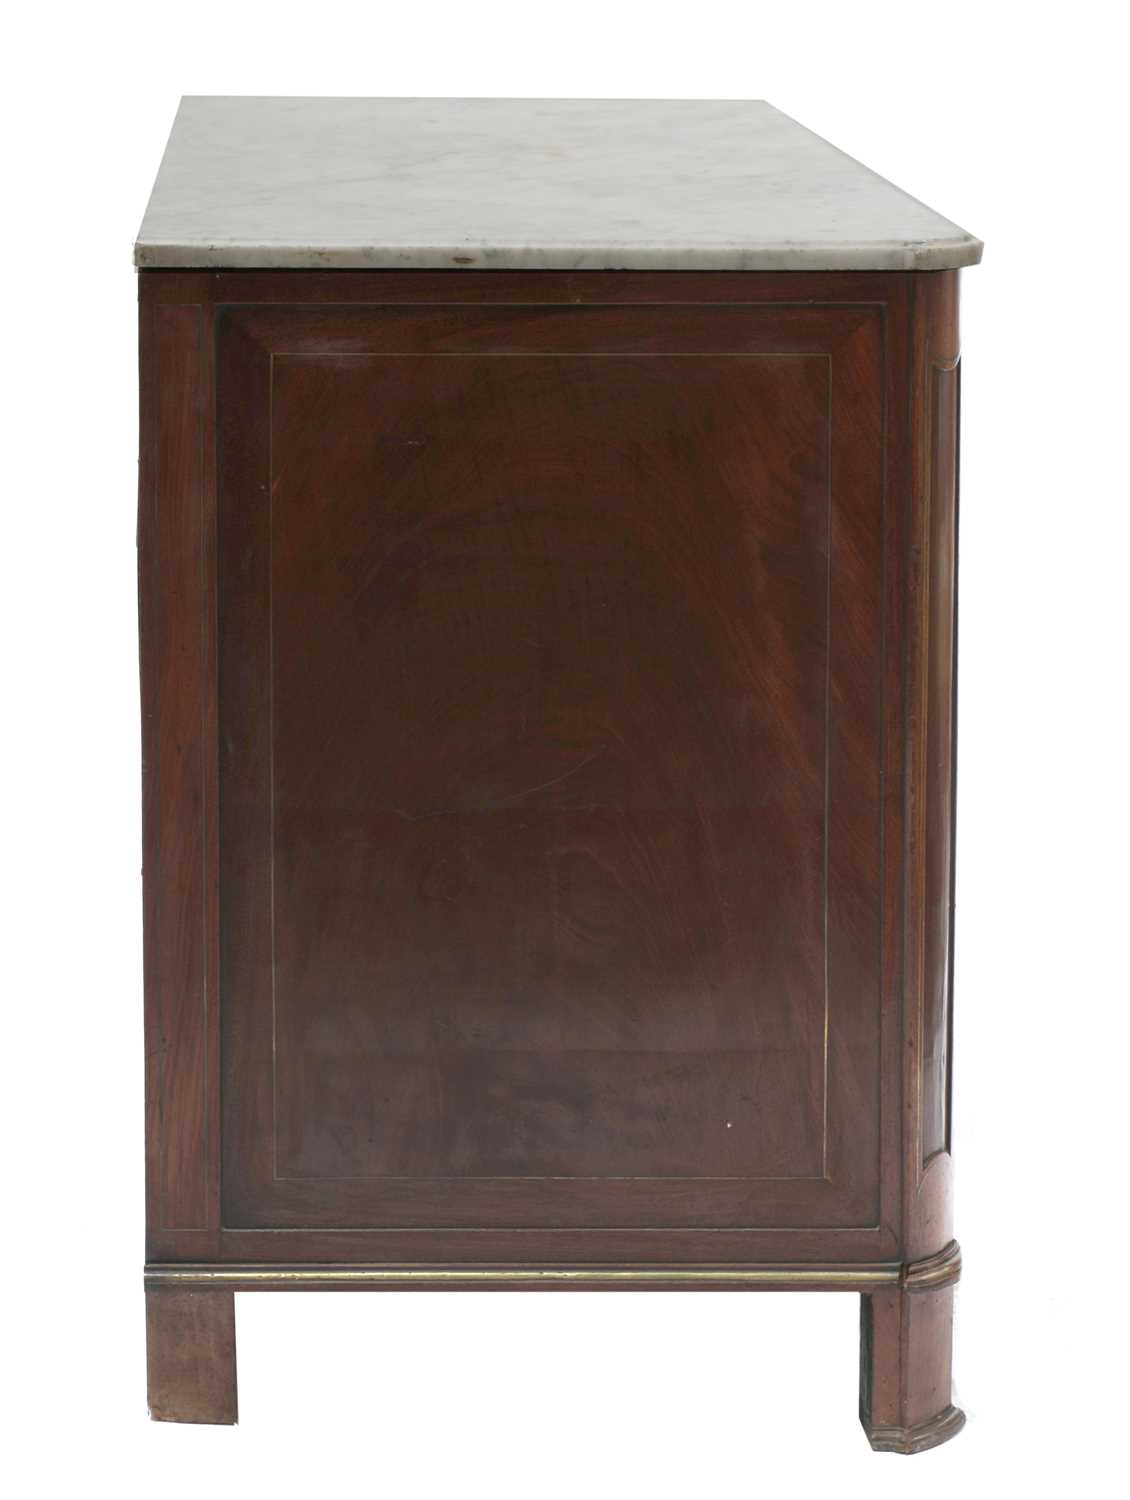 A French mahogany commode chest, - Image 4 of 5